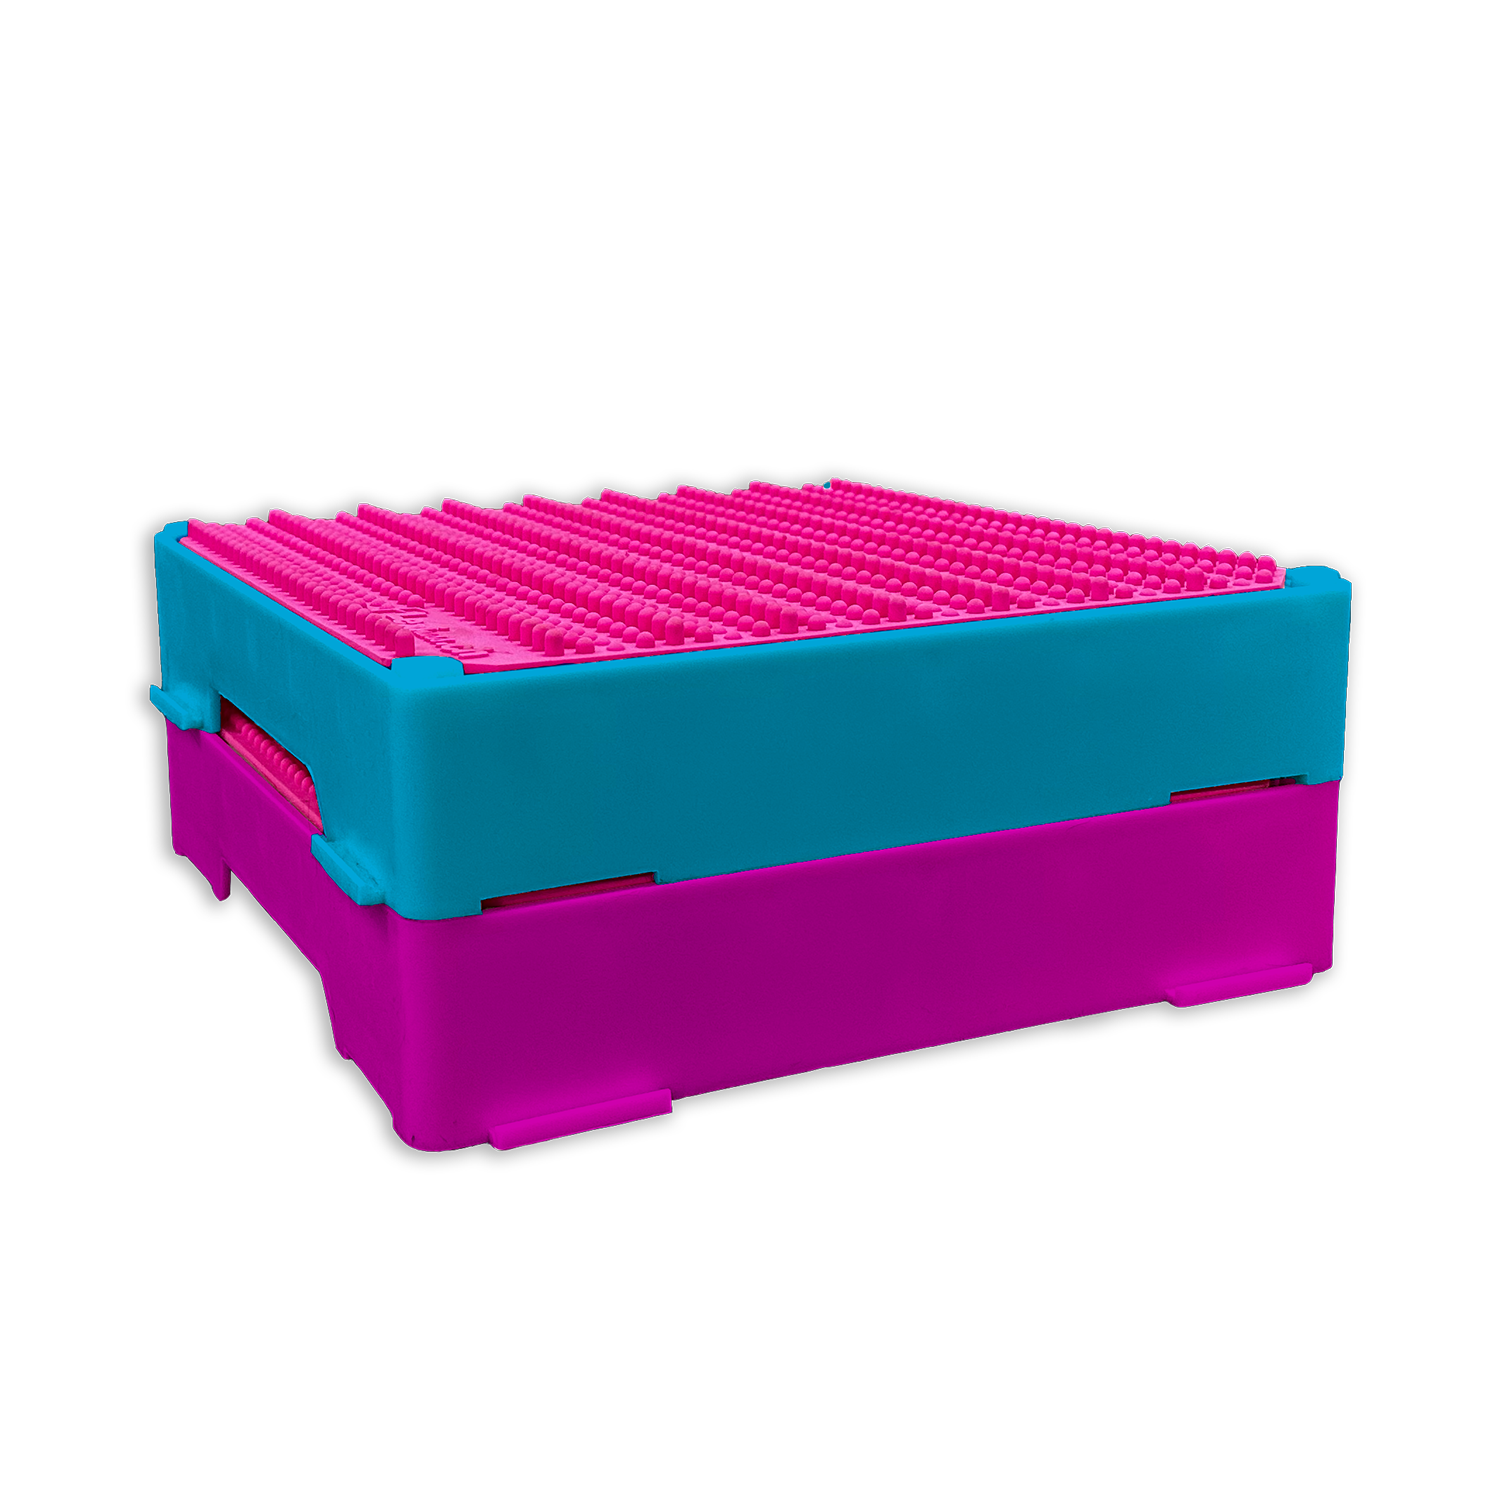 A pink and blue plastic crate on a white background adorned with Flexiness FlexBlox SensiMat, featuring a wave nub structure for extra comfort. The crate is perfect for pets to rest their